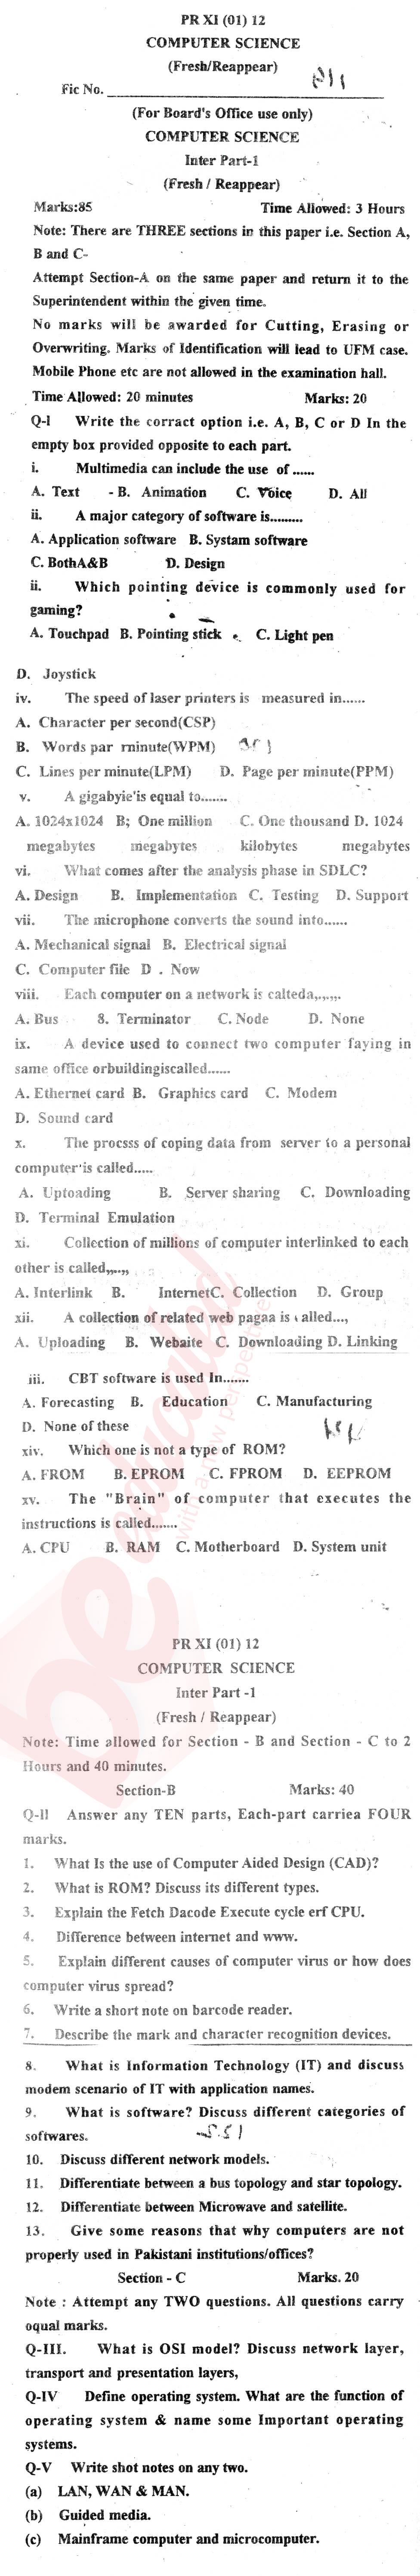 Computer Science ICS Part 1 Past Paper Group 1 BISE Malakand 2012